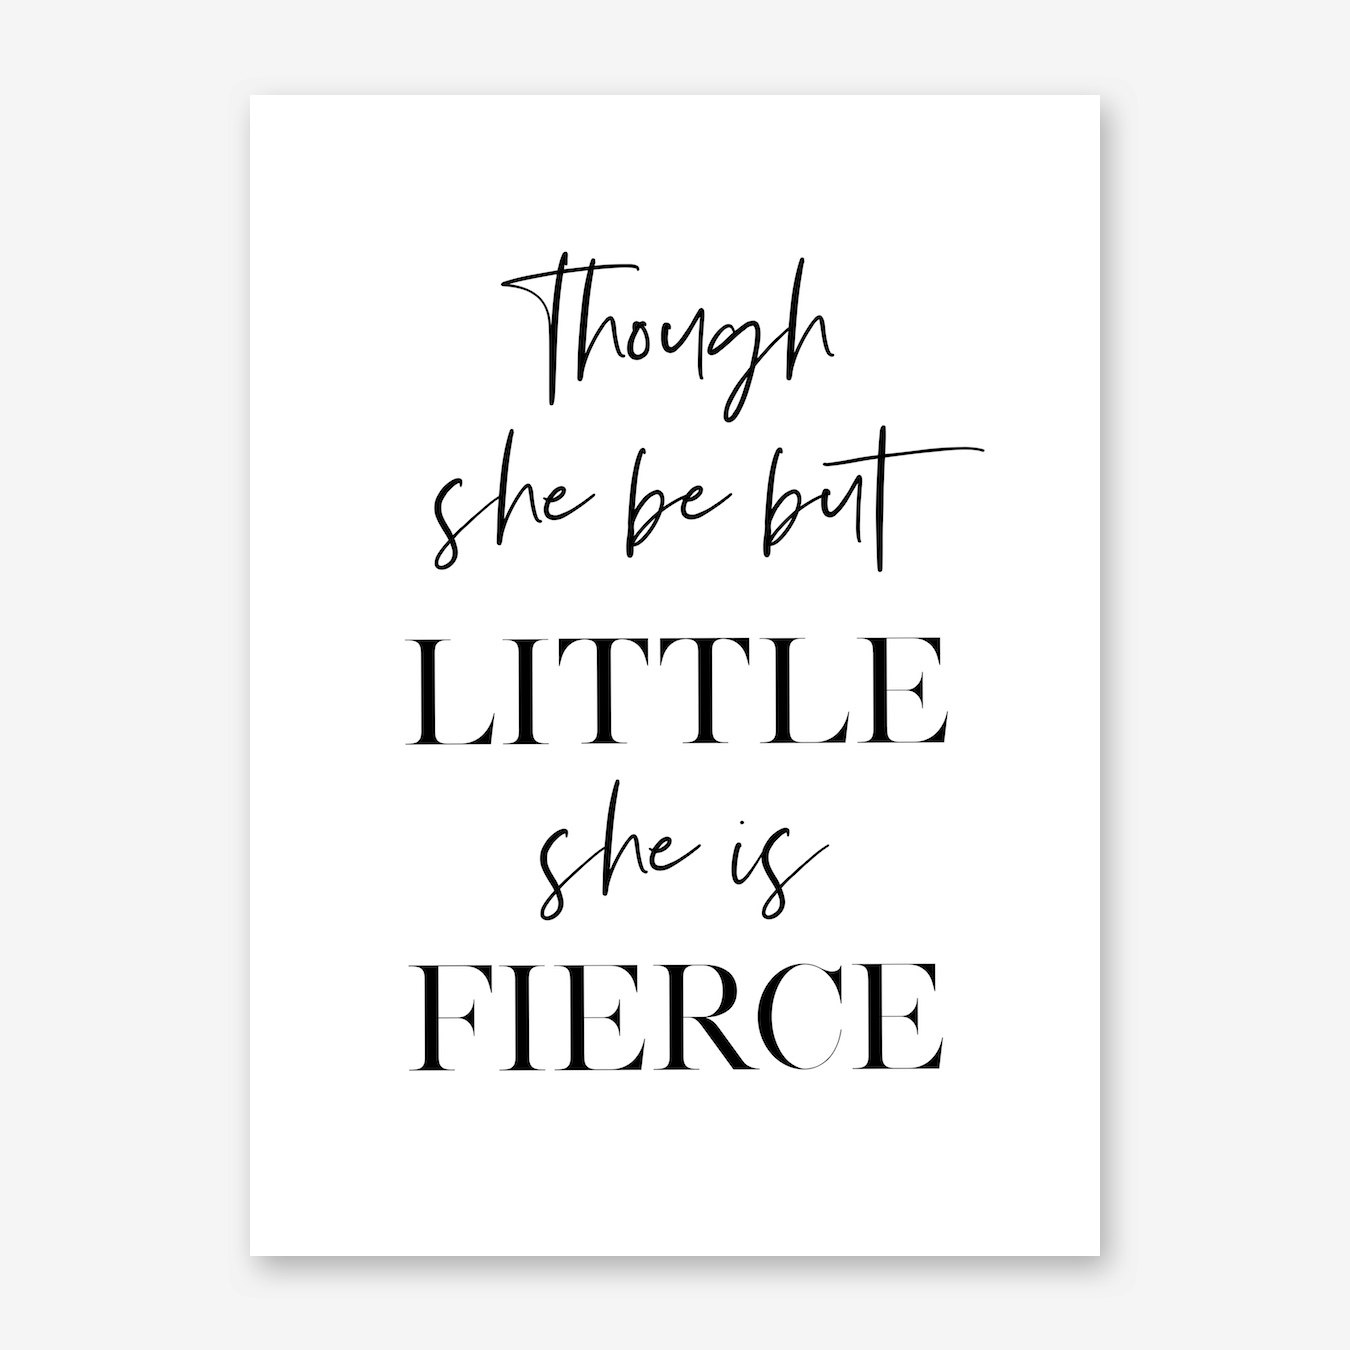 And though she be but little, she is fierce”. To my tiny @teegan